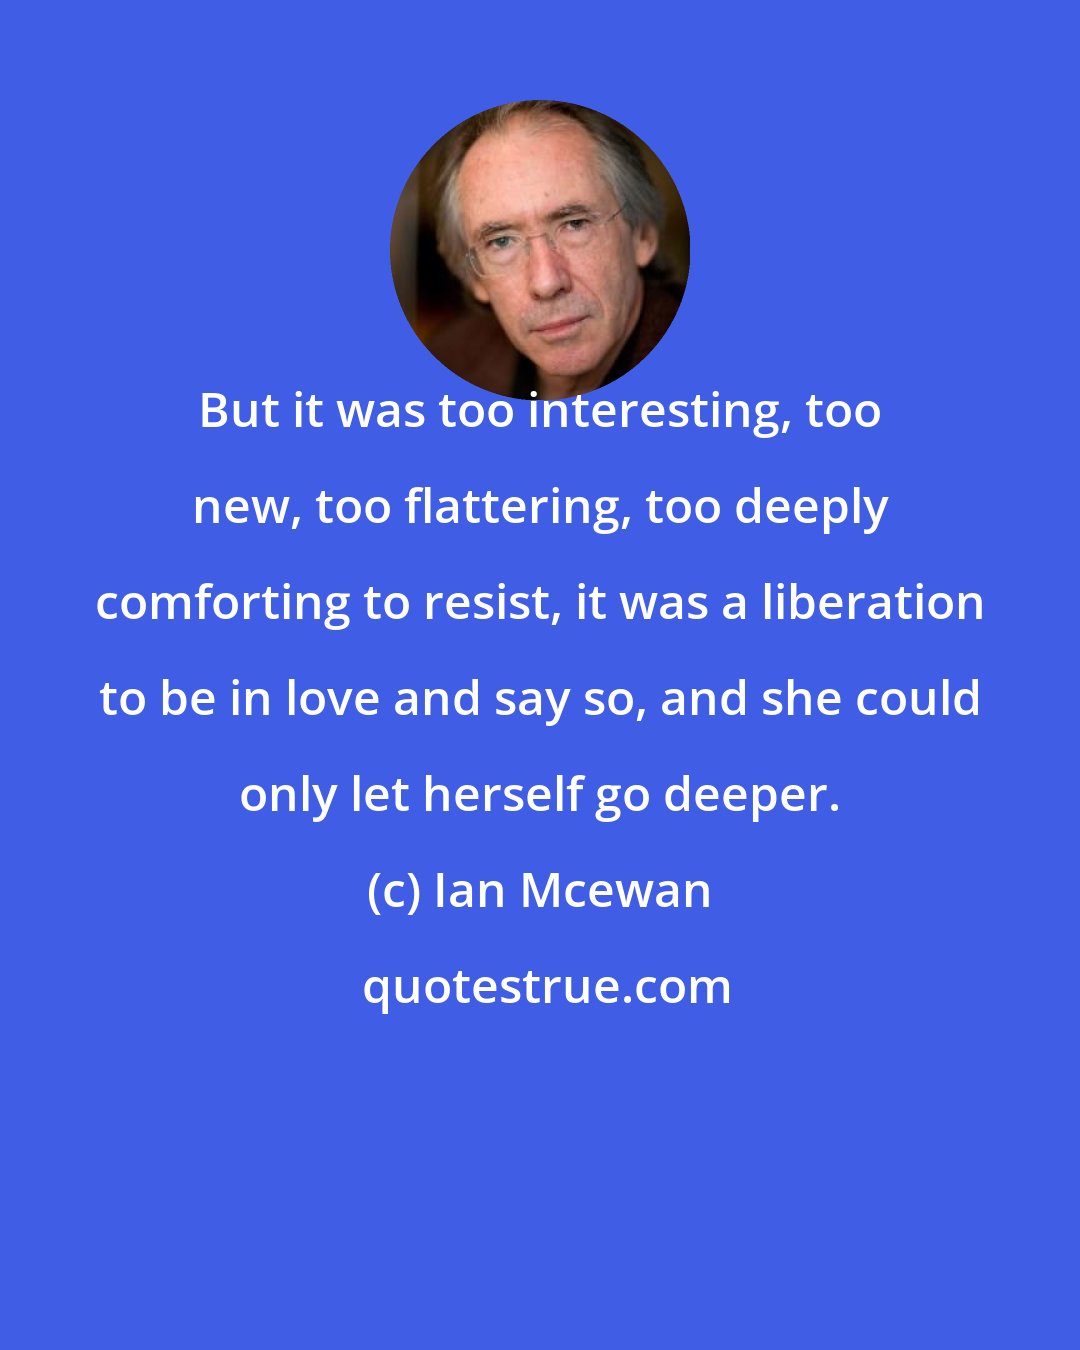 Ian Mcewan: But it was too interesting, too new, too flattering, too deeply comforting to resist, it was a liberation to be in love and say so, and she could only let herself go deeper.